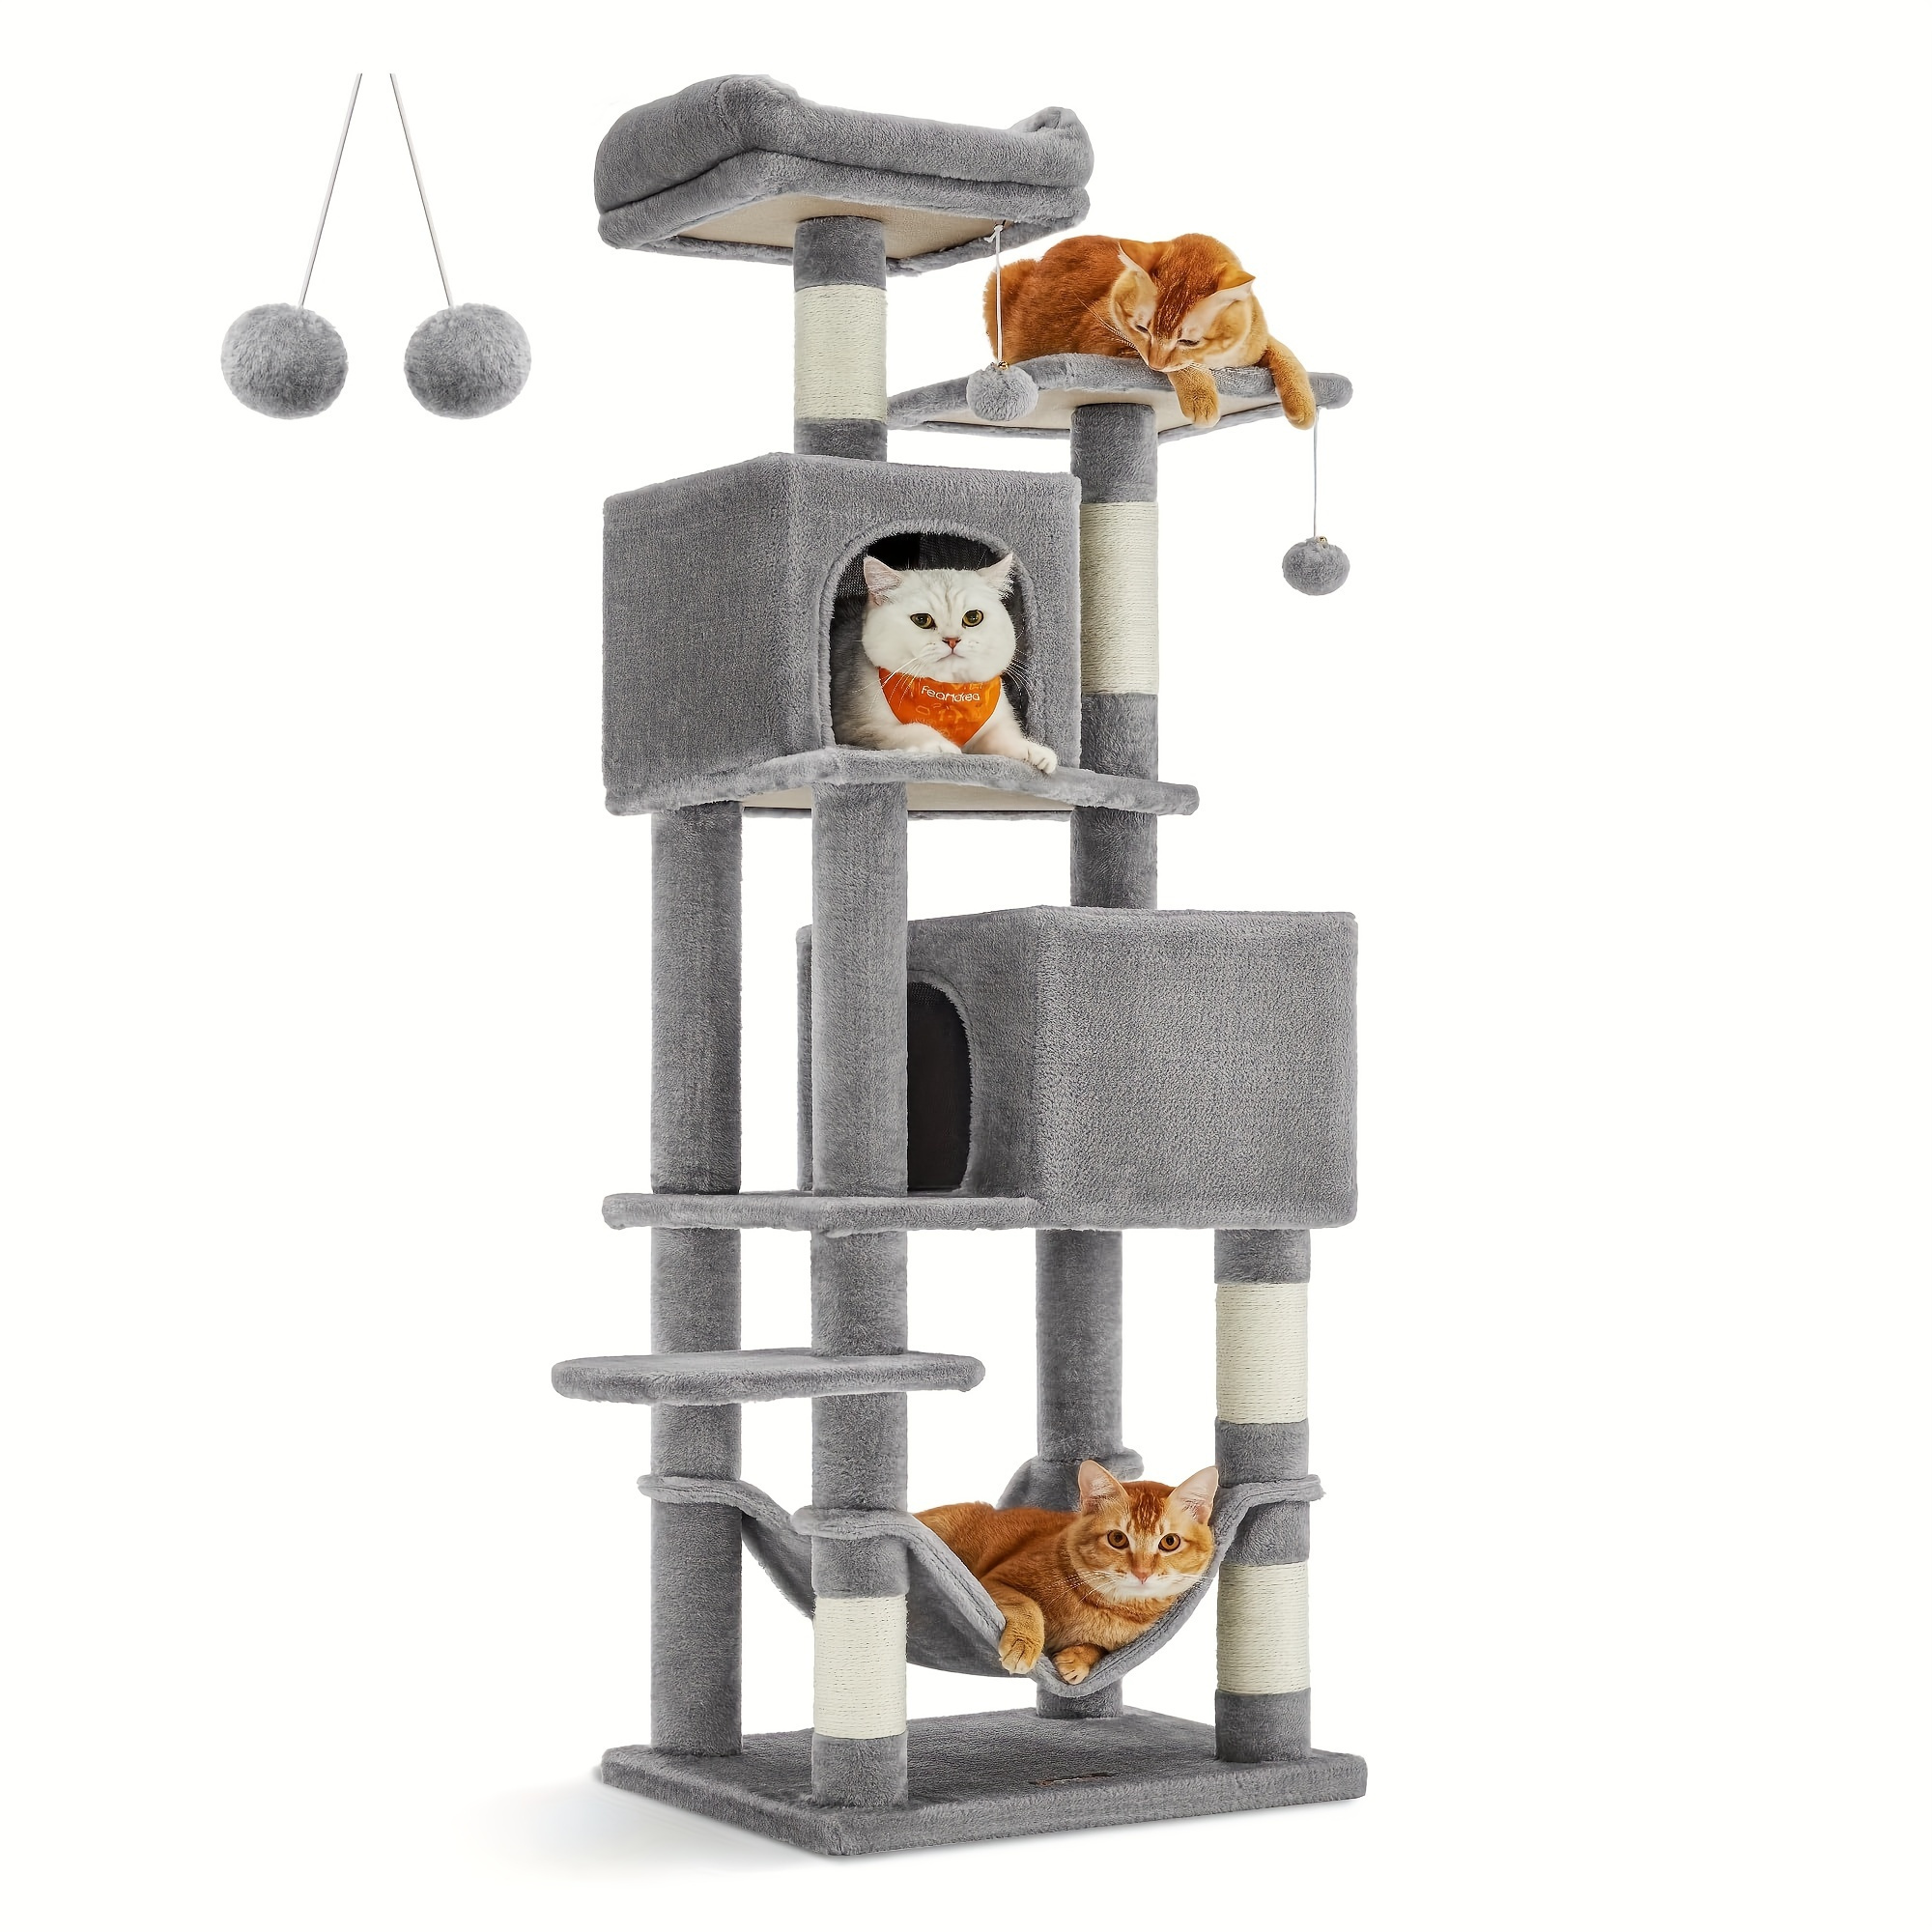 

Feandrea Cat Tree, 61-inch Cat Tower For Indoor Cats, Plush Multi-level Cat Condo With 5 Scratching Posts, 2 Perches, 2 Caves, Hammock, 2 Pompoms